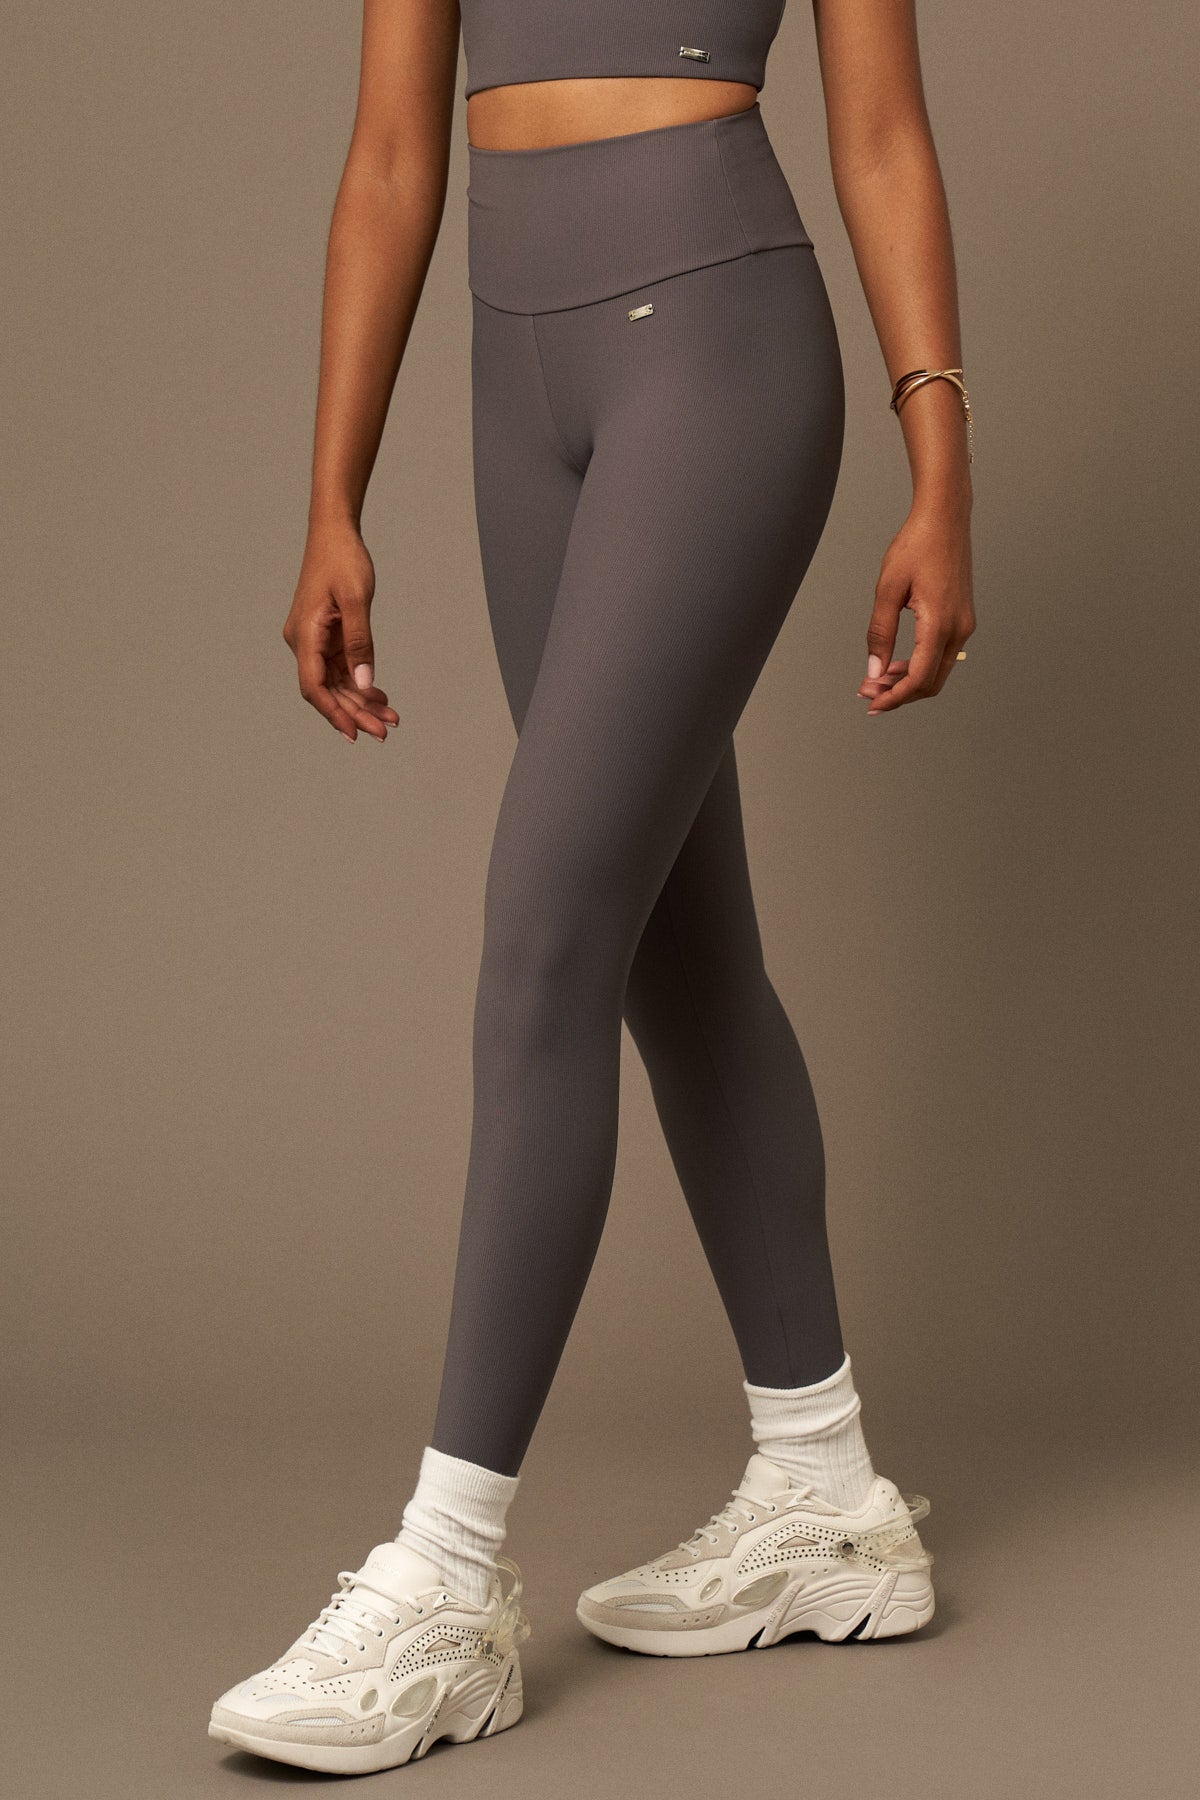 Daily Legging at Stone-Long Leggings-Store Clothing Sustainable Recycled Yoga Leggings Women's On-line Barcelona Believe Athletics Sustainable Recycled Yoga Clothes